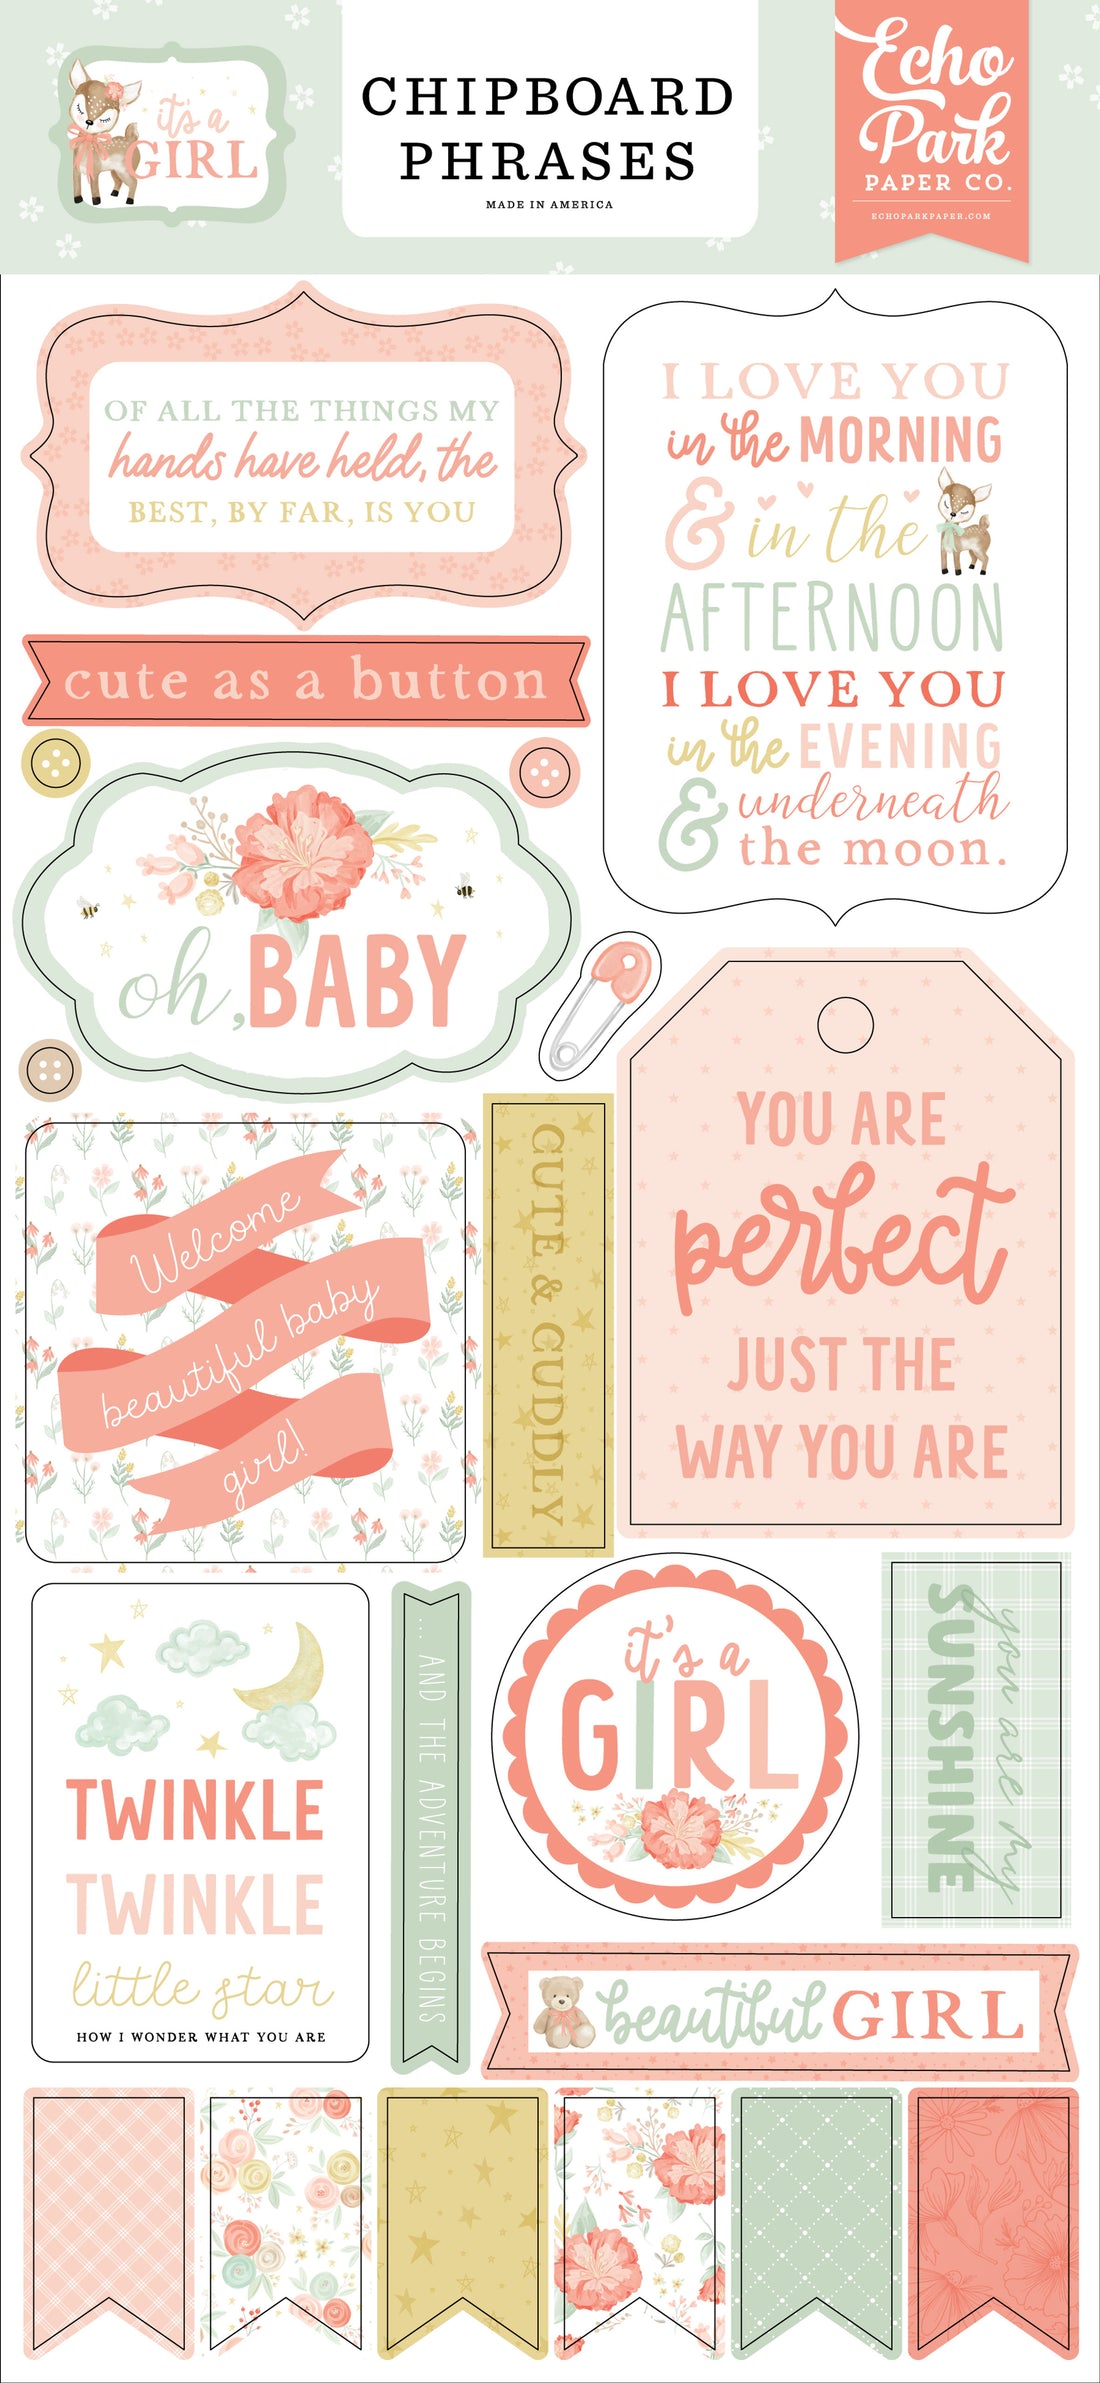 Echo Park IT’S A GIRL Chipboard Phrases 22pc Scrapbooksrus